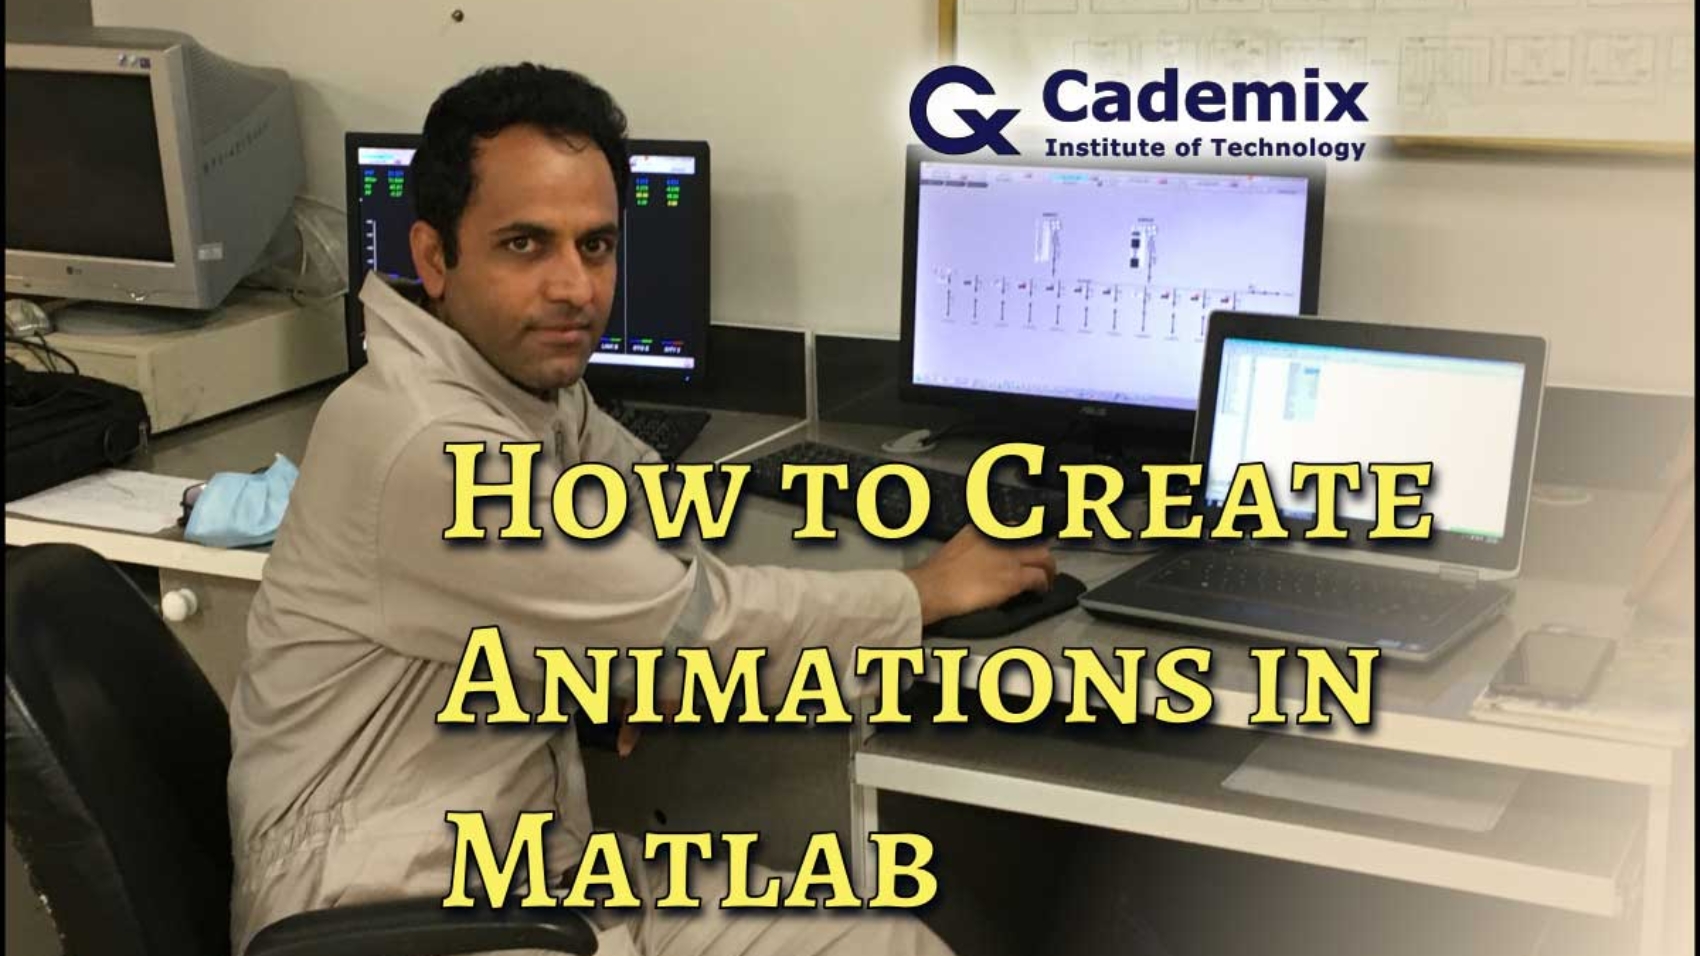 How to create animation in Matlab? | Cademix Institute of Technology